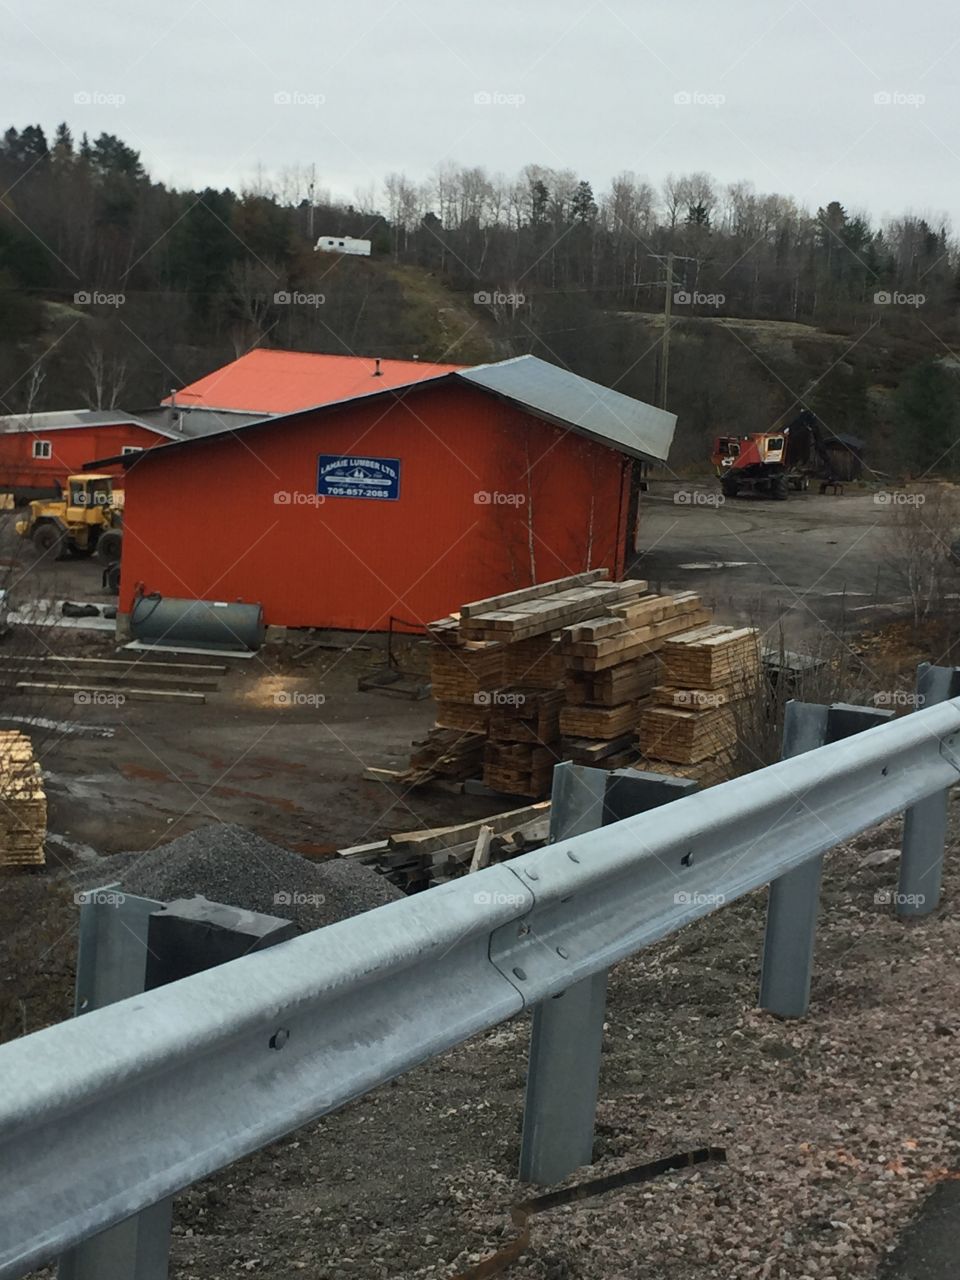 This is Lahaie Lumber it was Established in 1948 now has been owned by four generations 65 years of experience they still log  the logs down the river to the Mill.